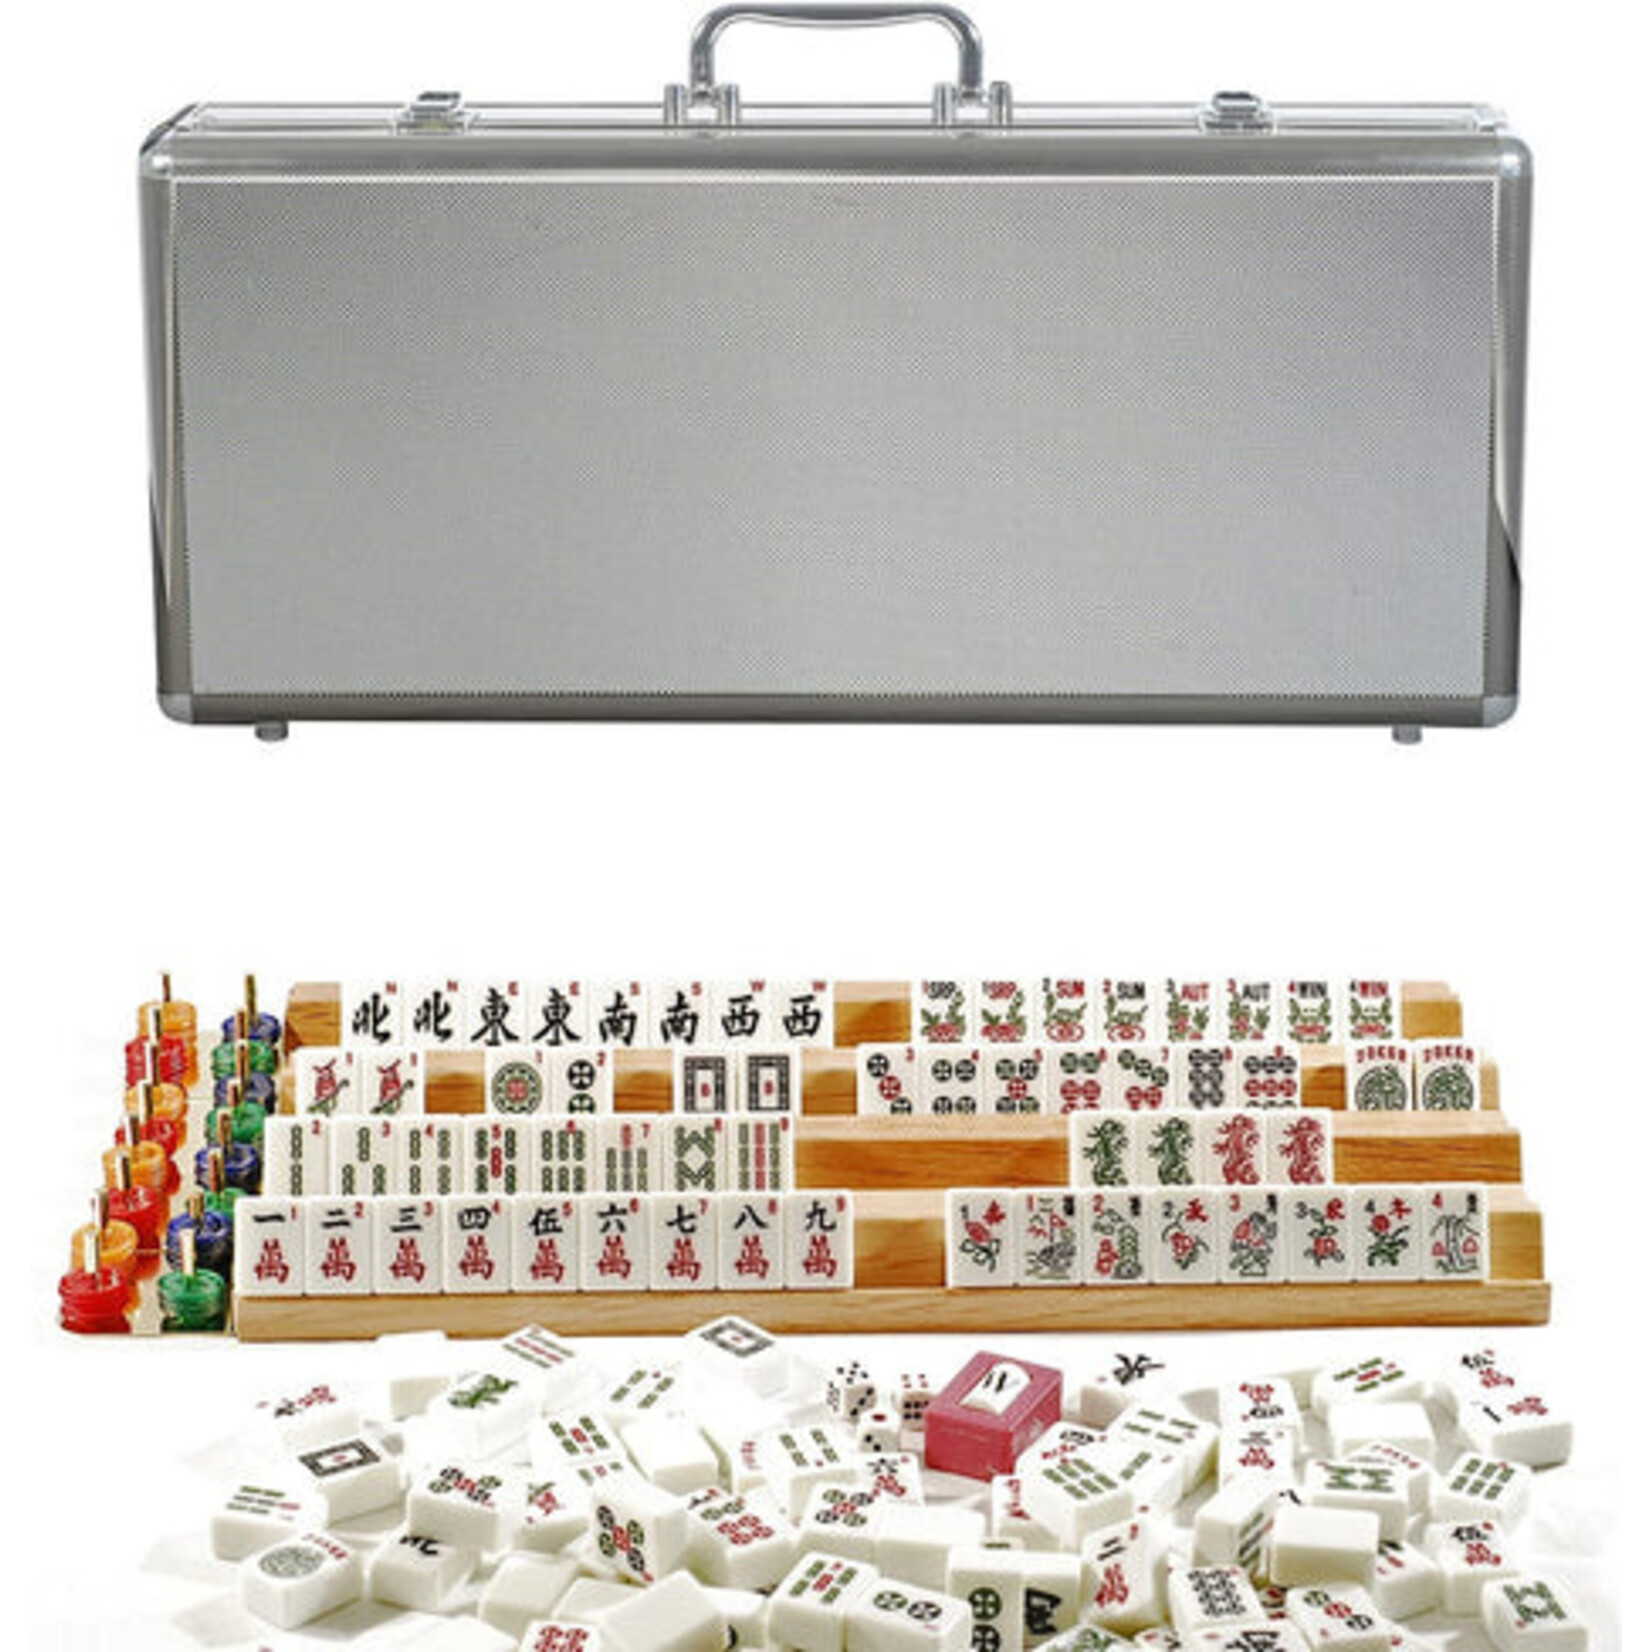 Wood Expressions MAH JONG: American Silver Deluxe Case